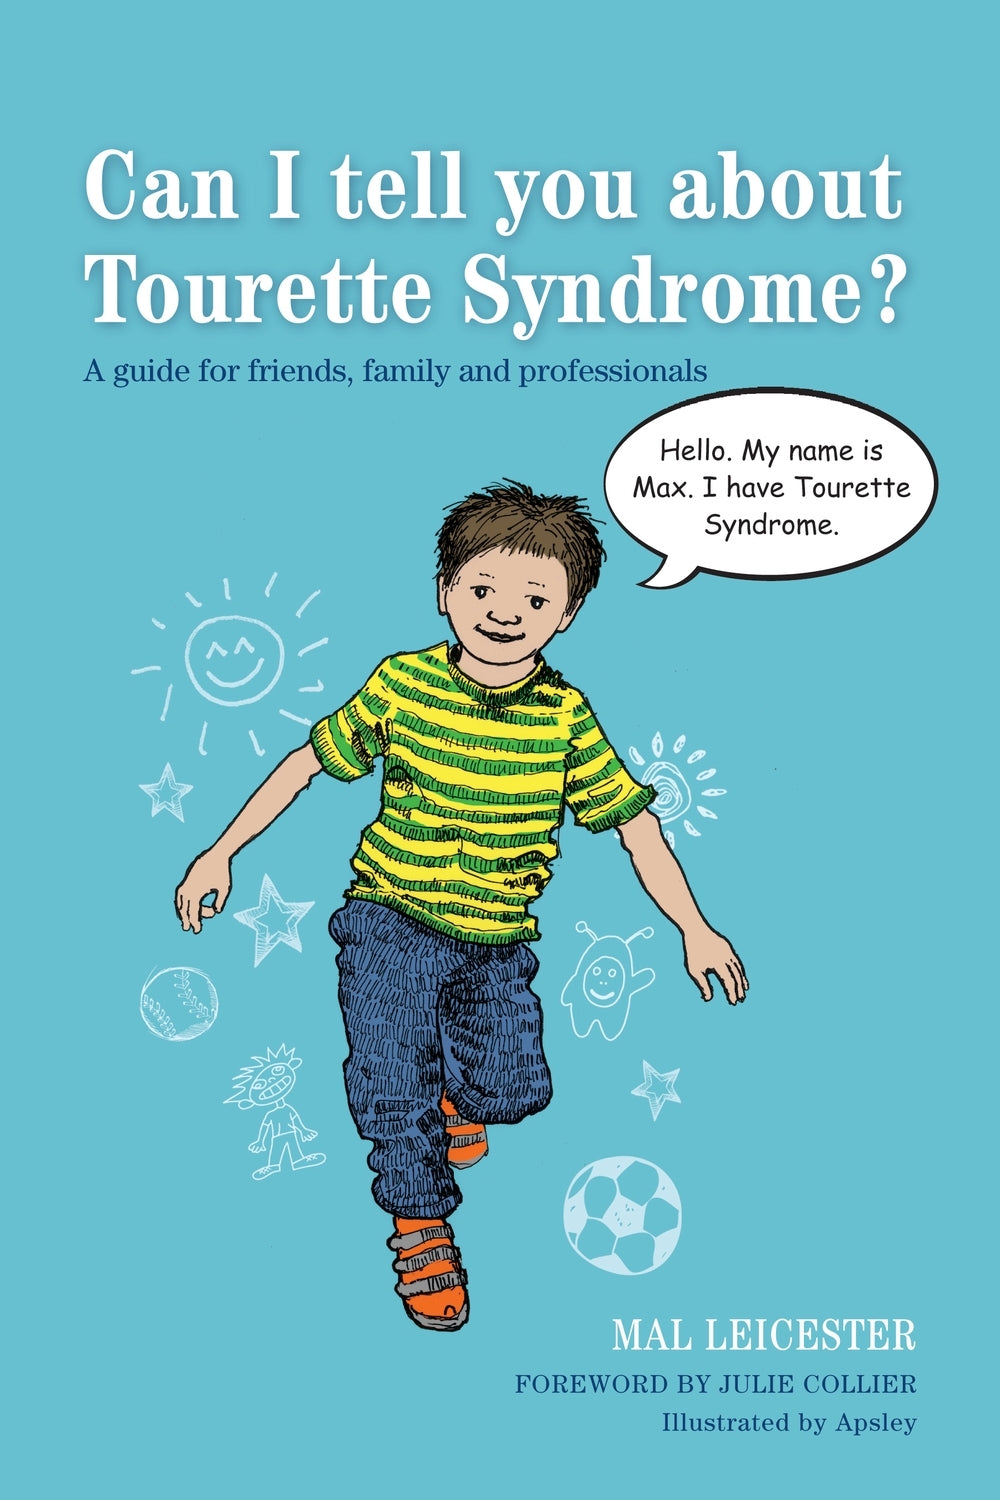 Can I tell you about Tourette Syndrome? by Mal Leicester, Julie Collier,  Apsley